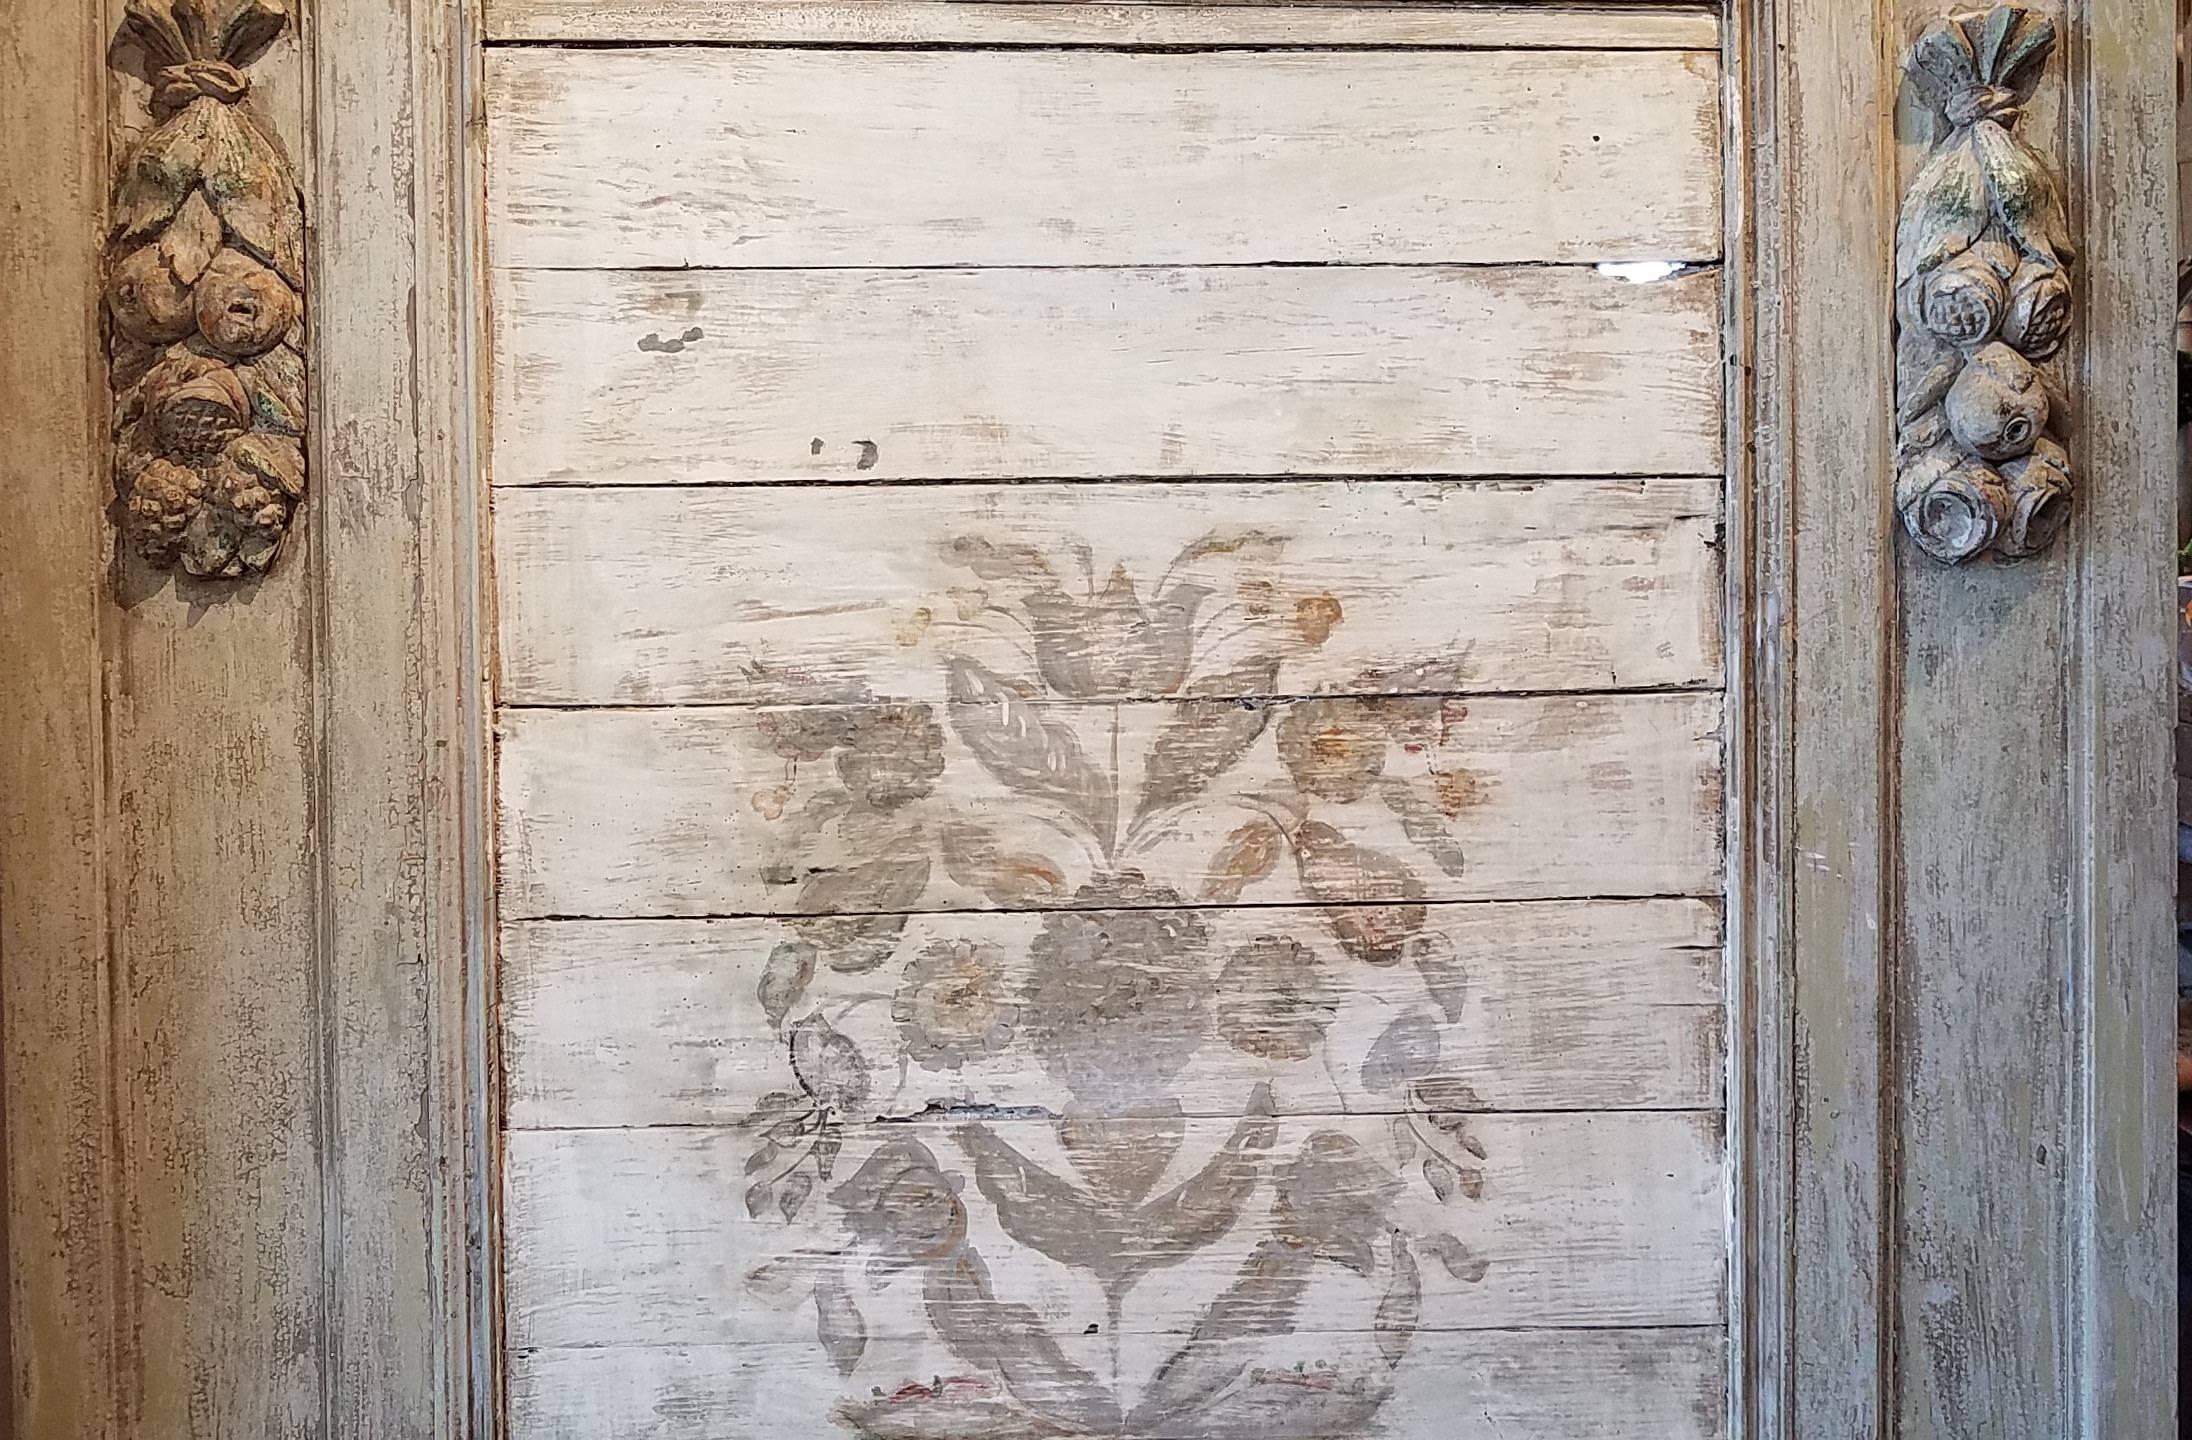 Lots of character in this mirror with the horizontal slatted front and rustic painted floral design and richly carved hanging fruit garland. Some old repair and distressed and in some places chippy paint. Mirror has been replaced.